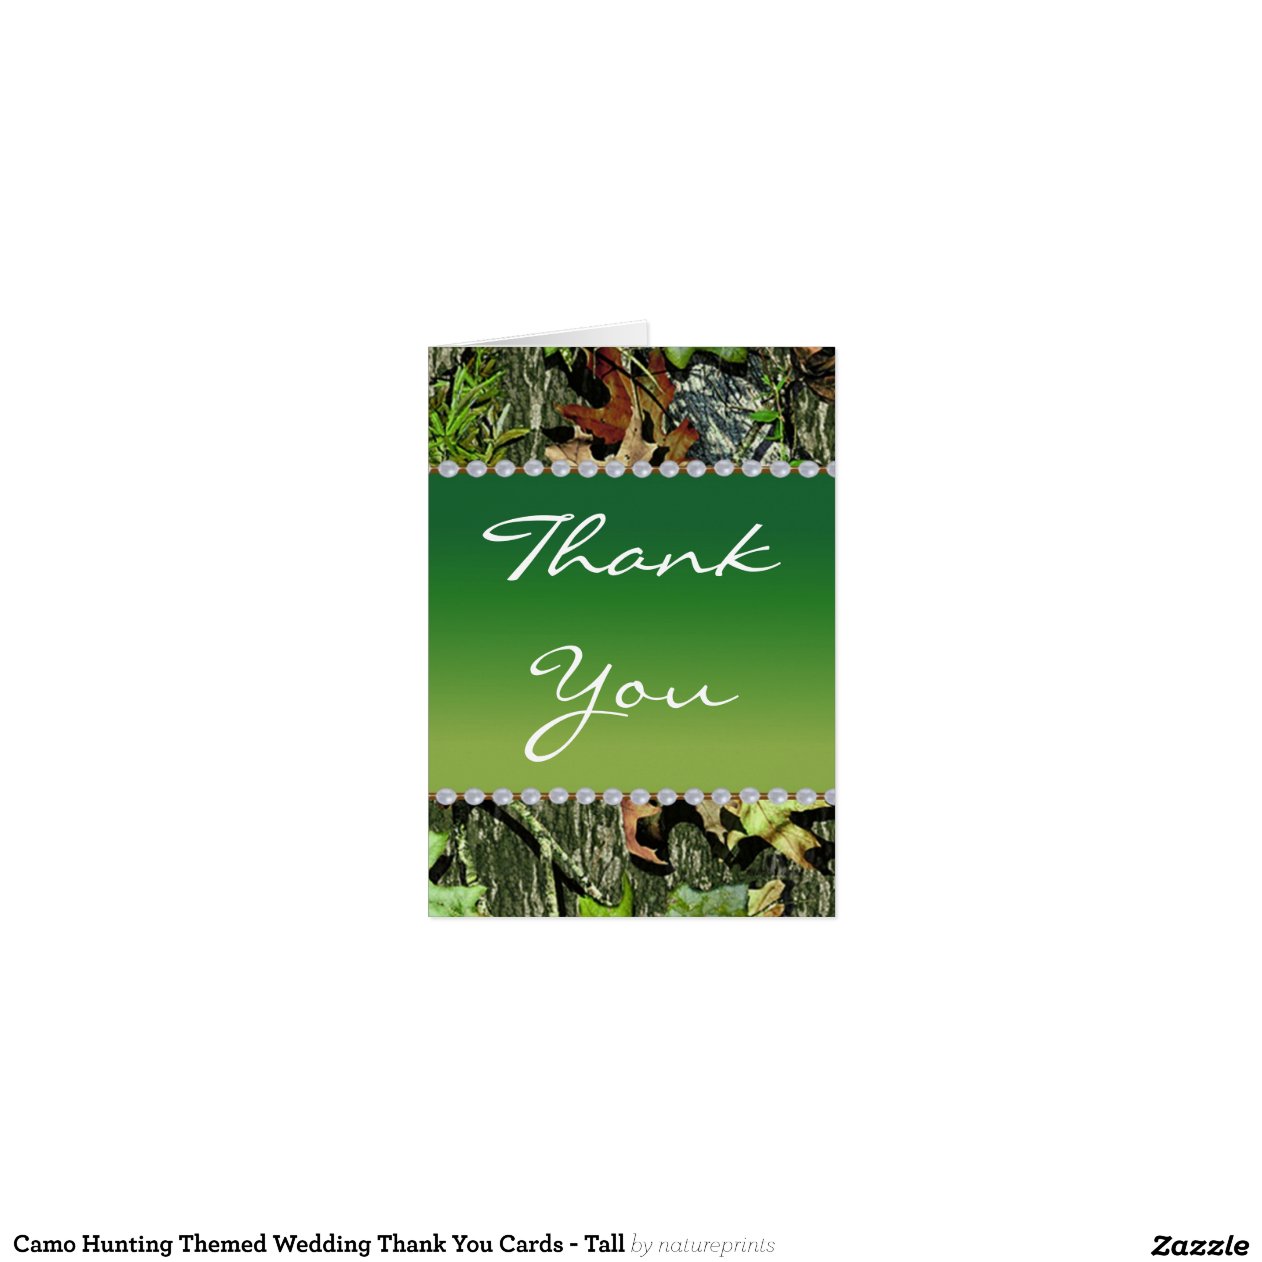 Camo Hunting Themed Wedding Thank You Cards - Tall | Zazzle